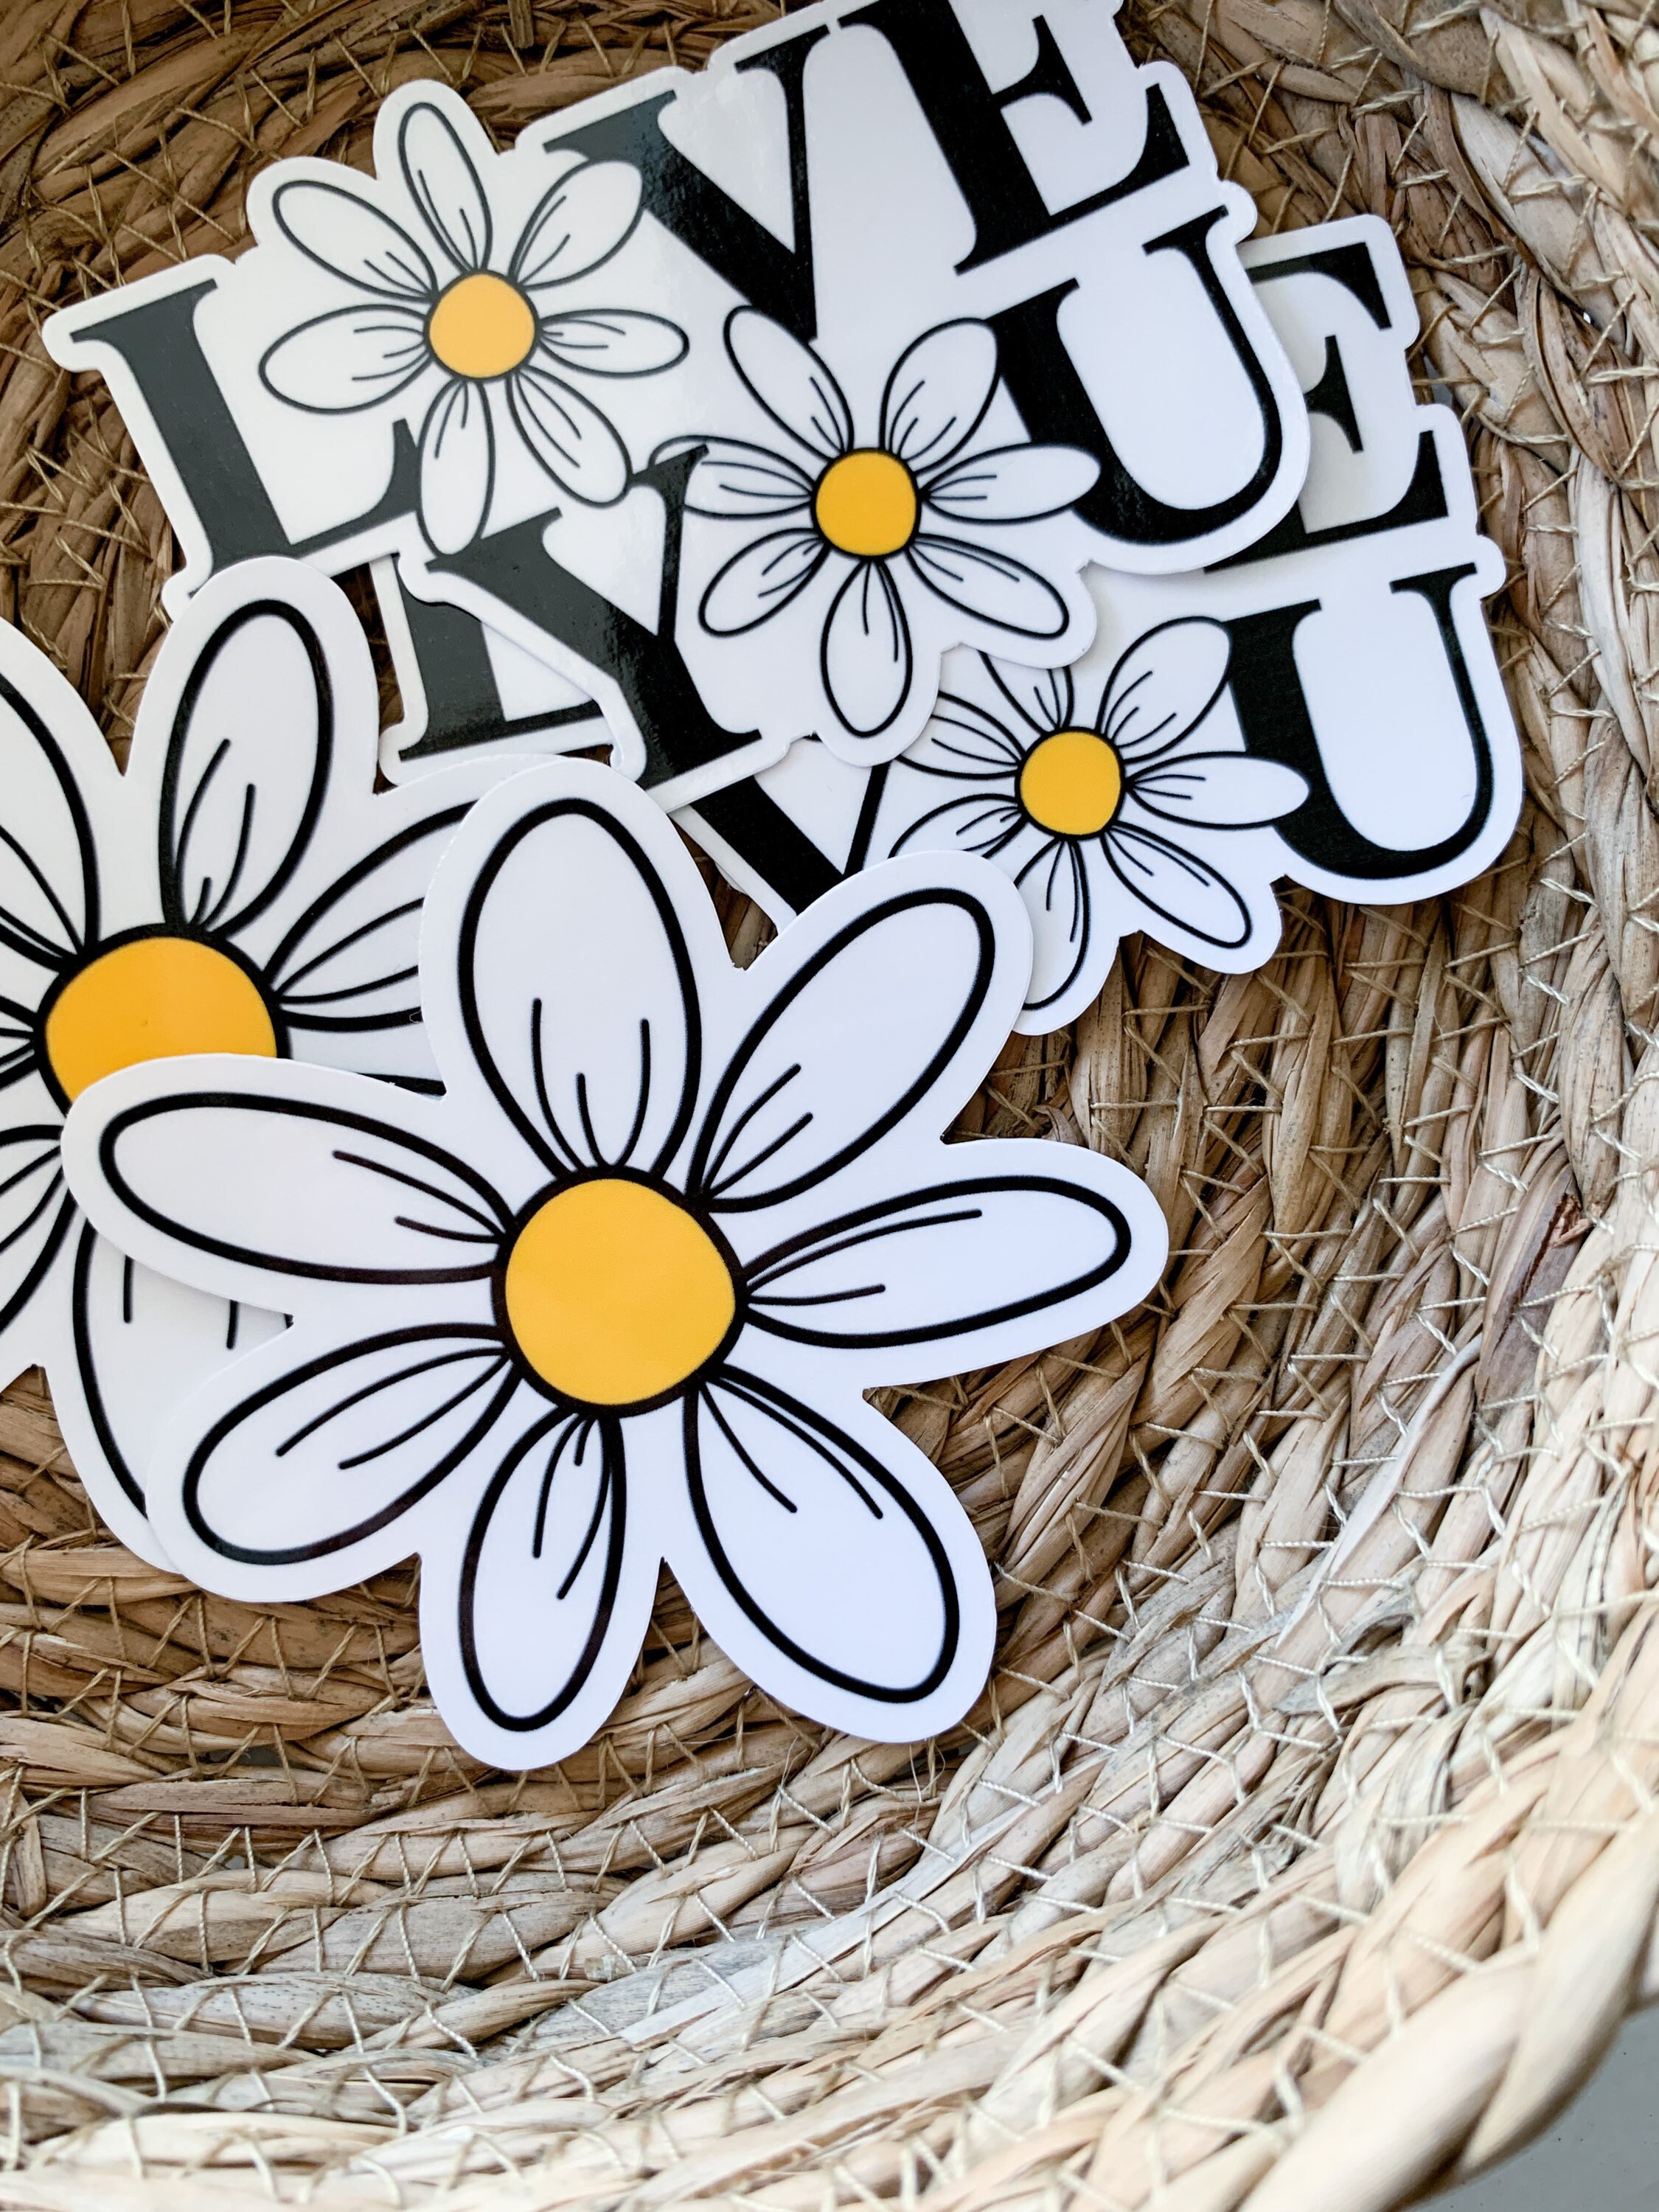 Cute Happy Daisy Stickers 1 Small Flower Smiling Daisy Stickers to